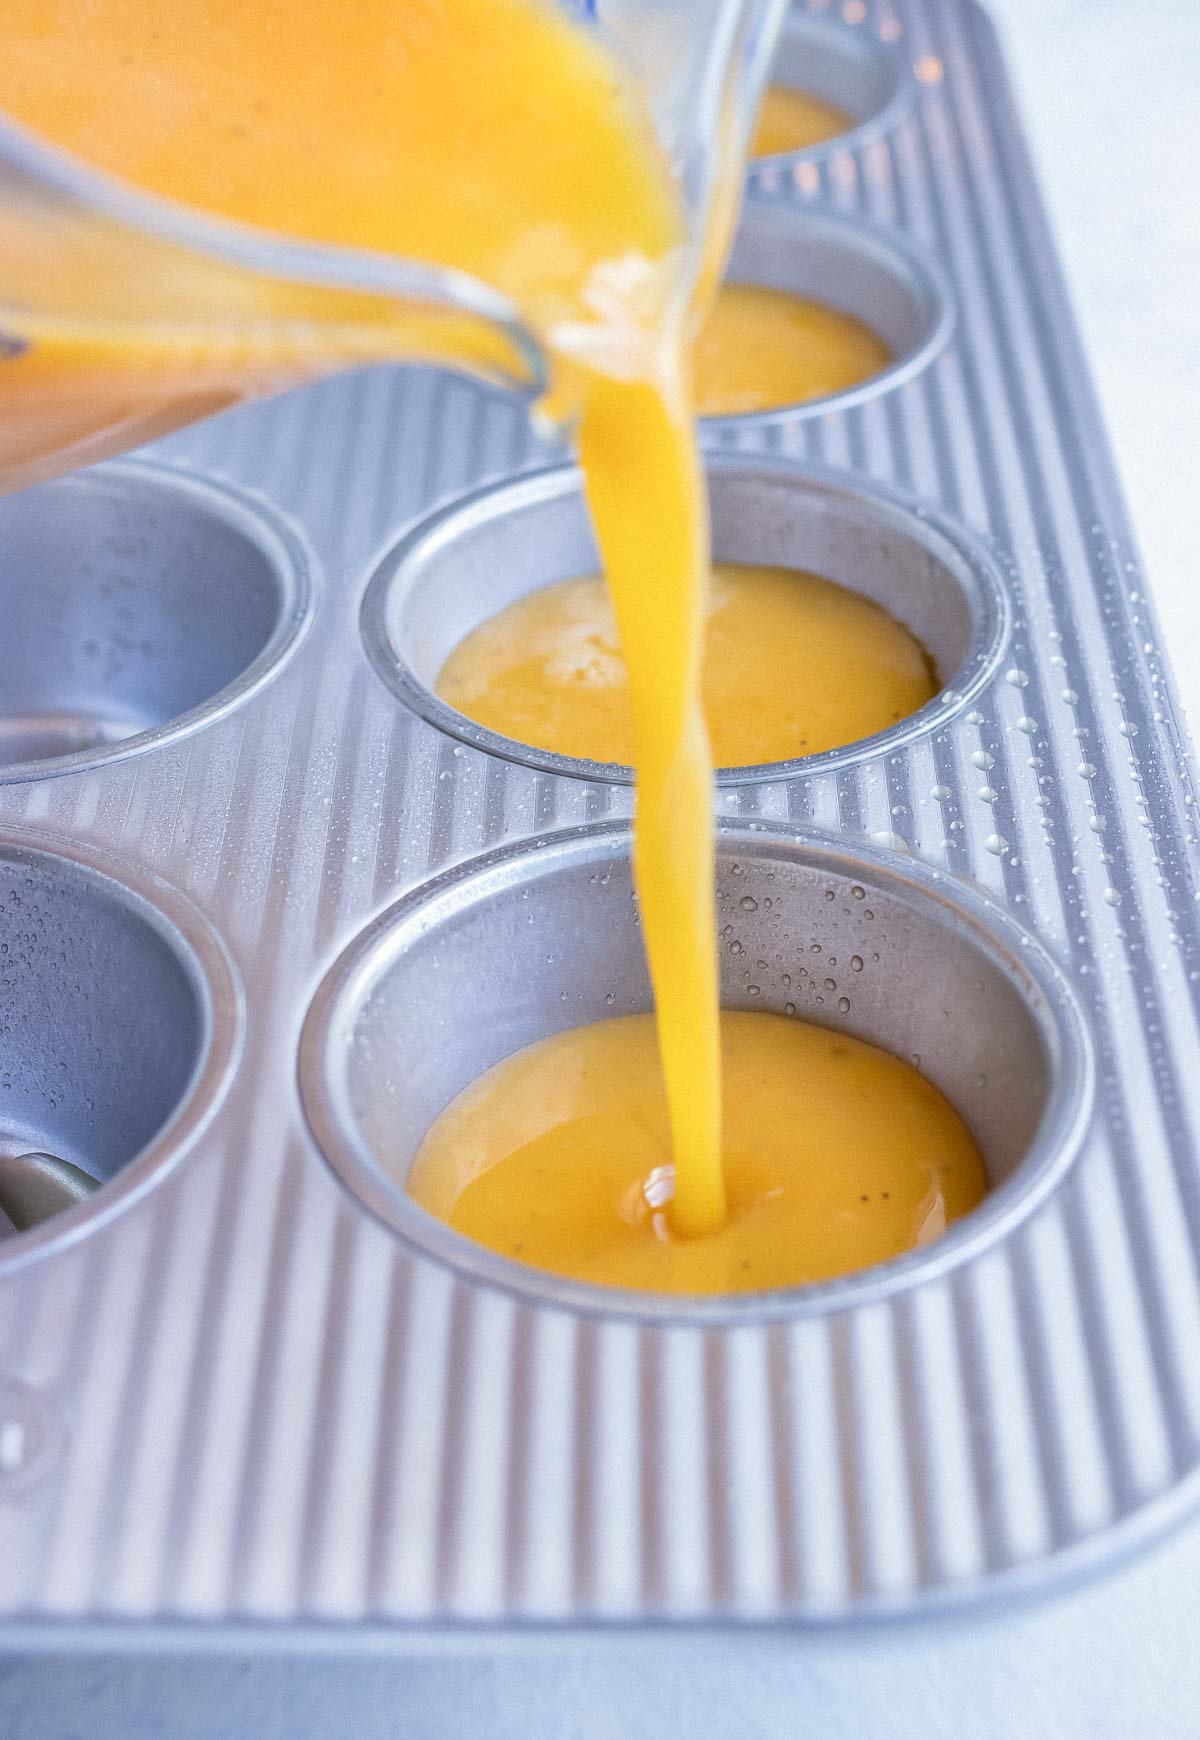 The egg mixture is poured into the non-stick muffin tin.